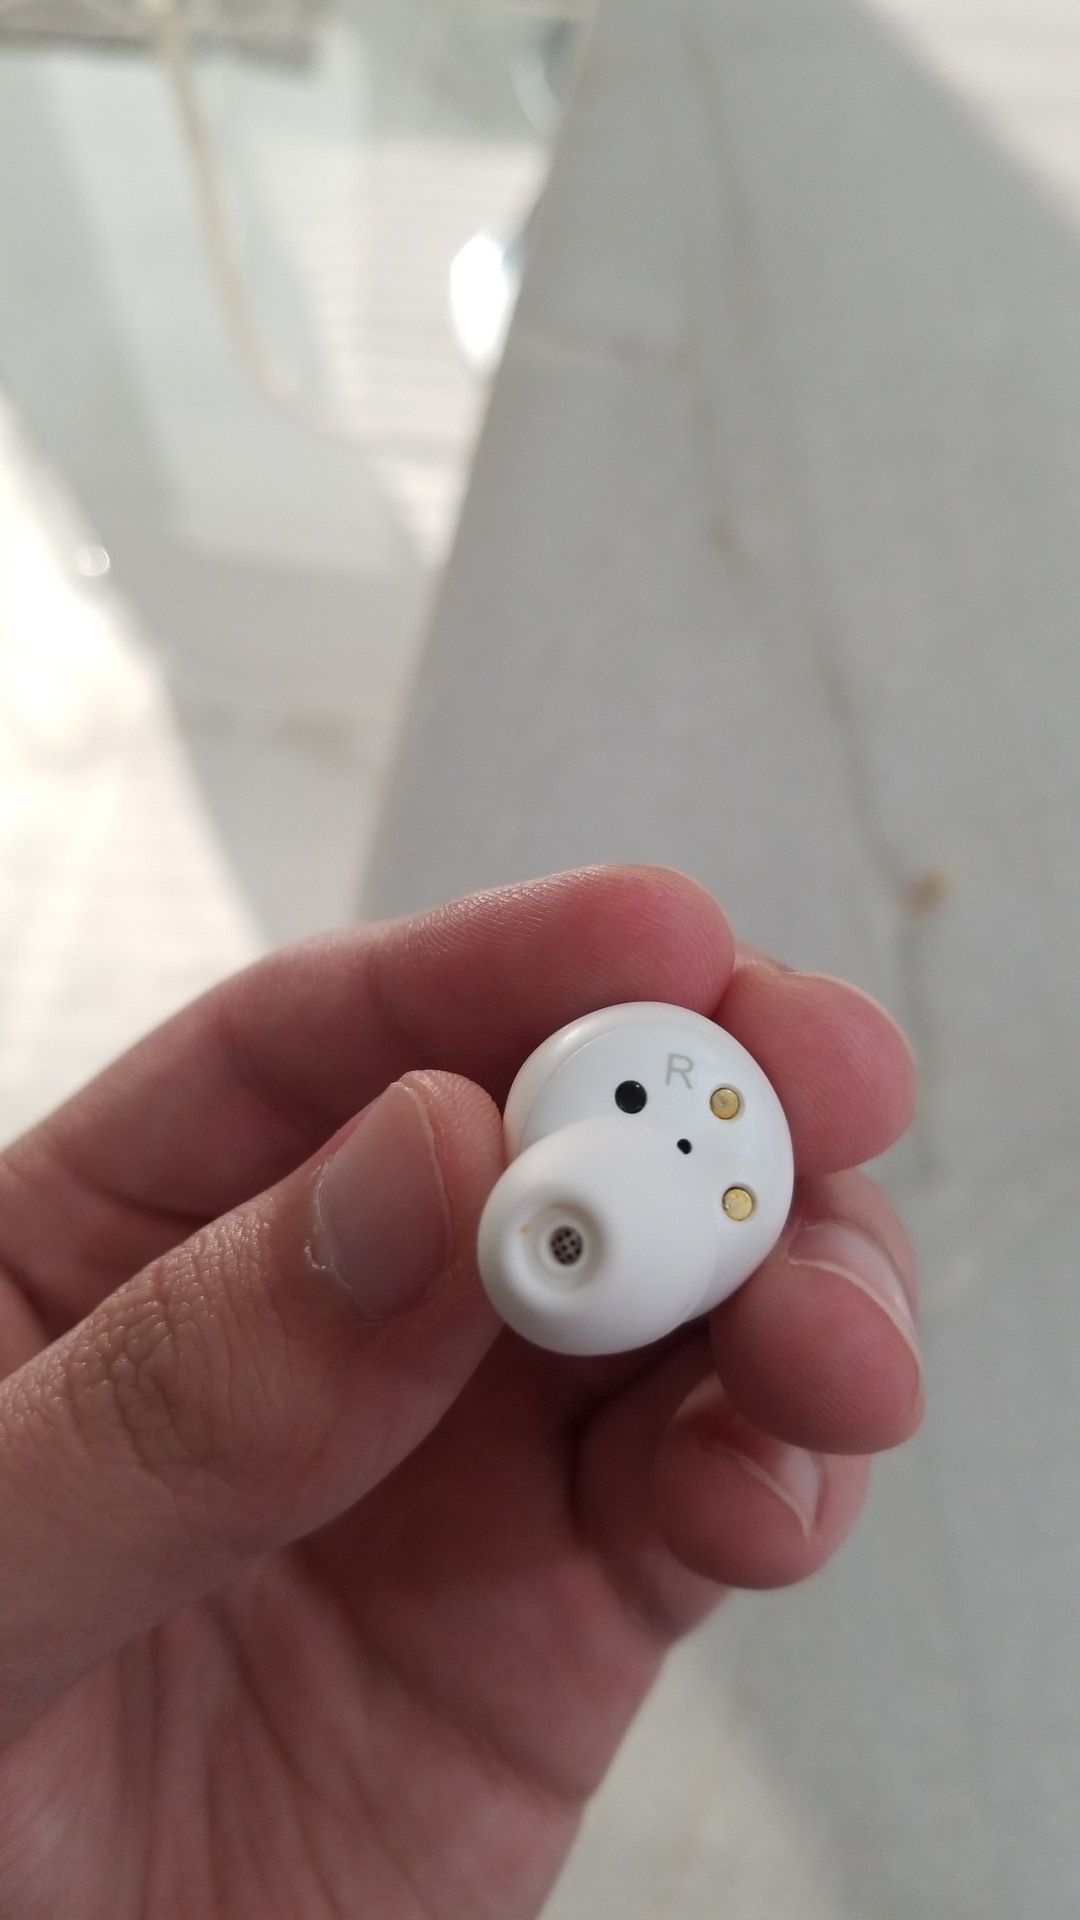 Samsung galaxy buds replacement bud (right ear)